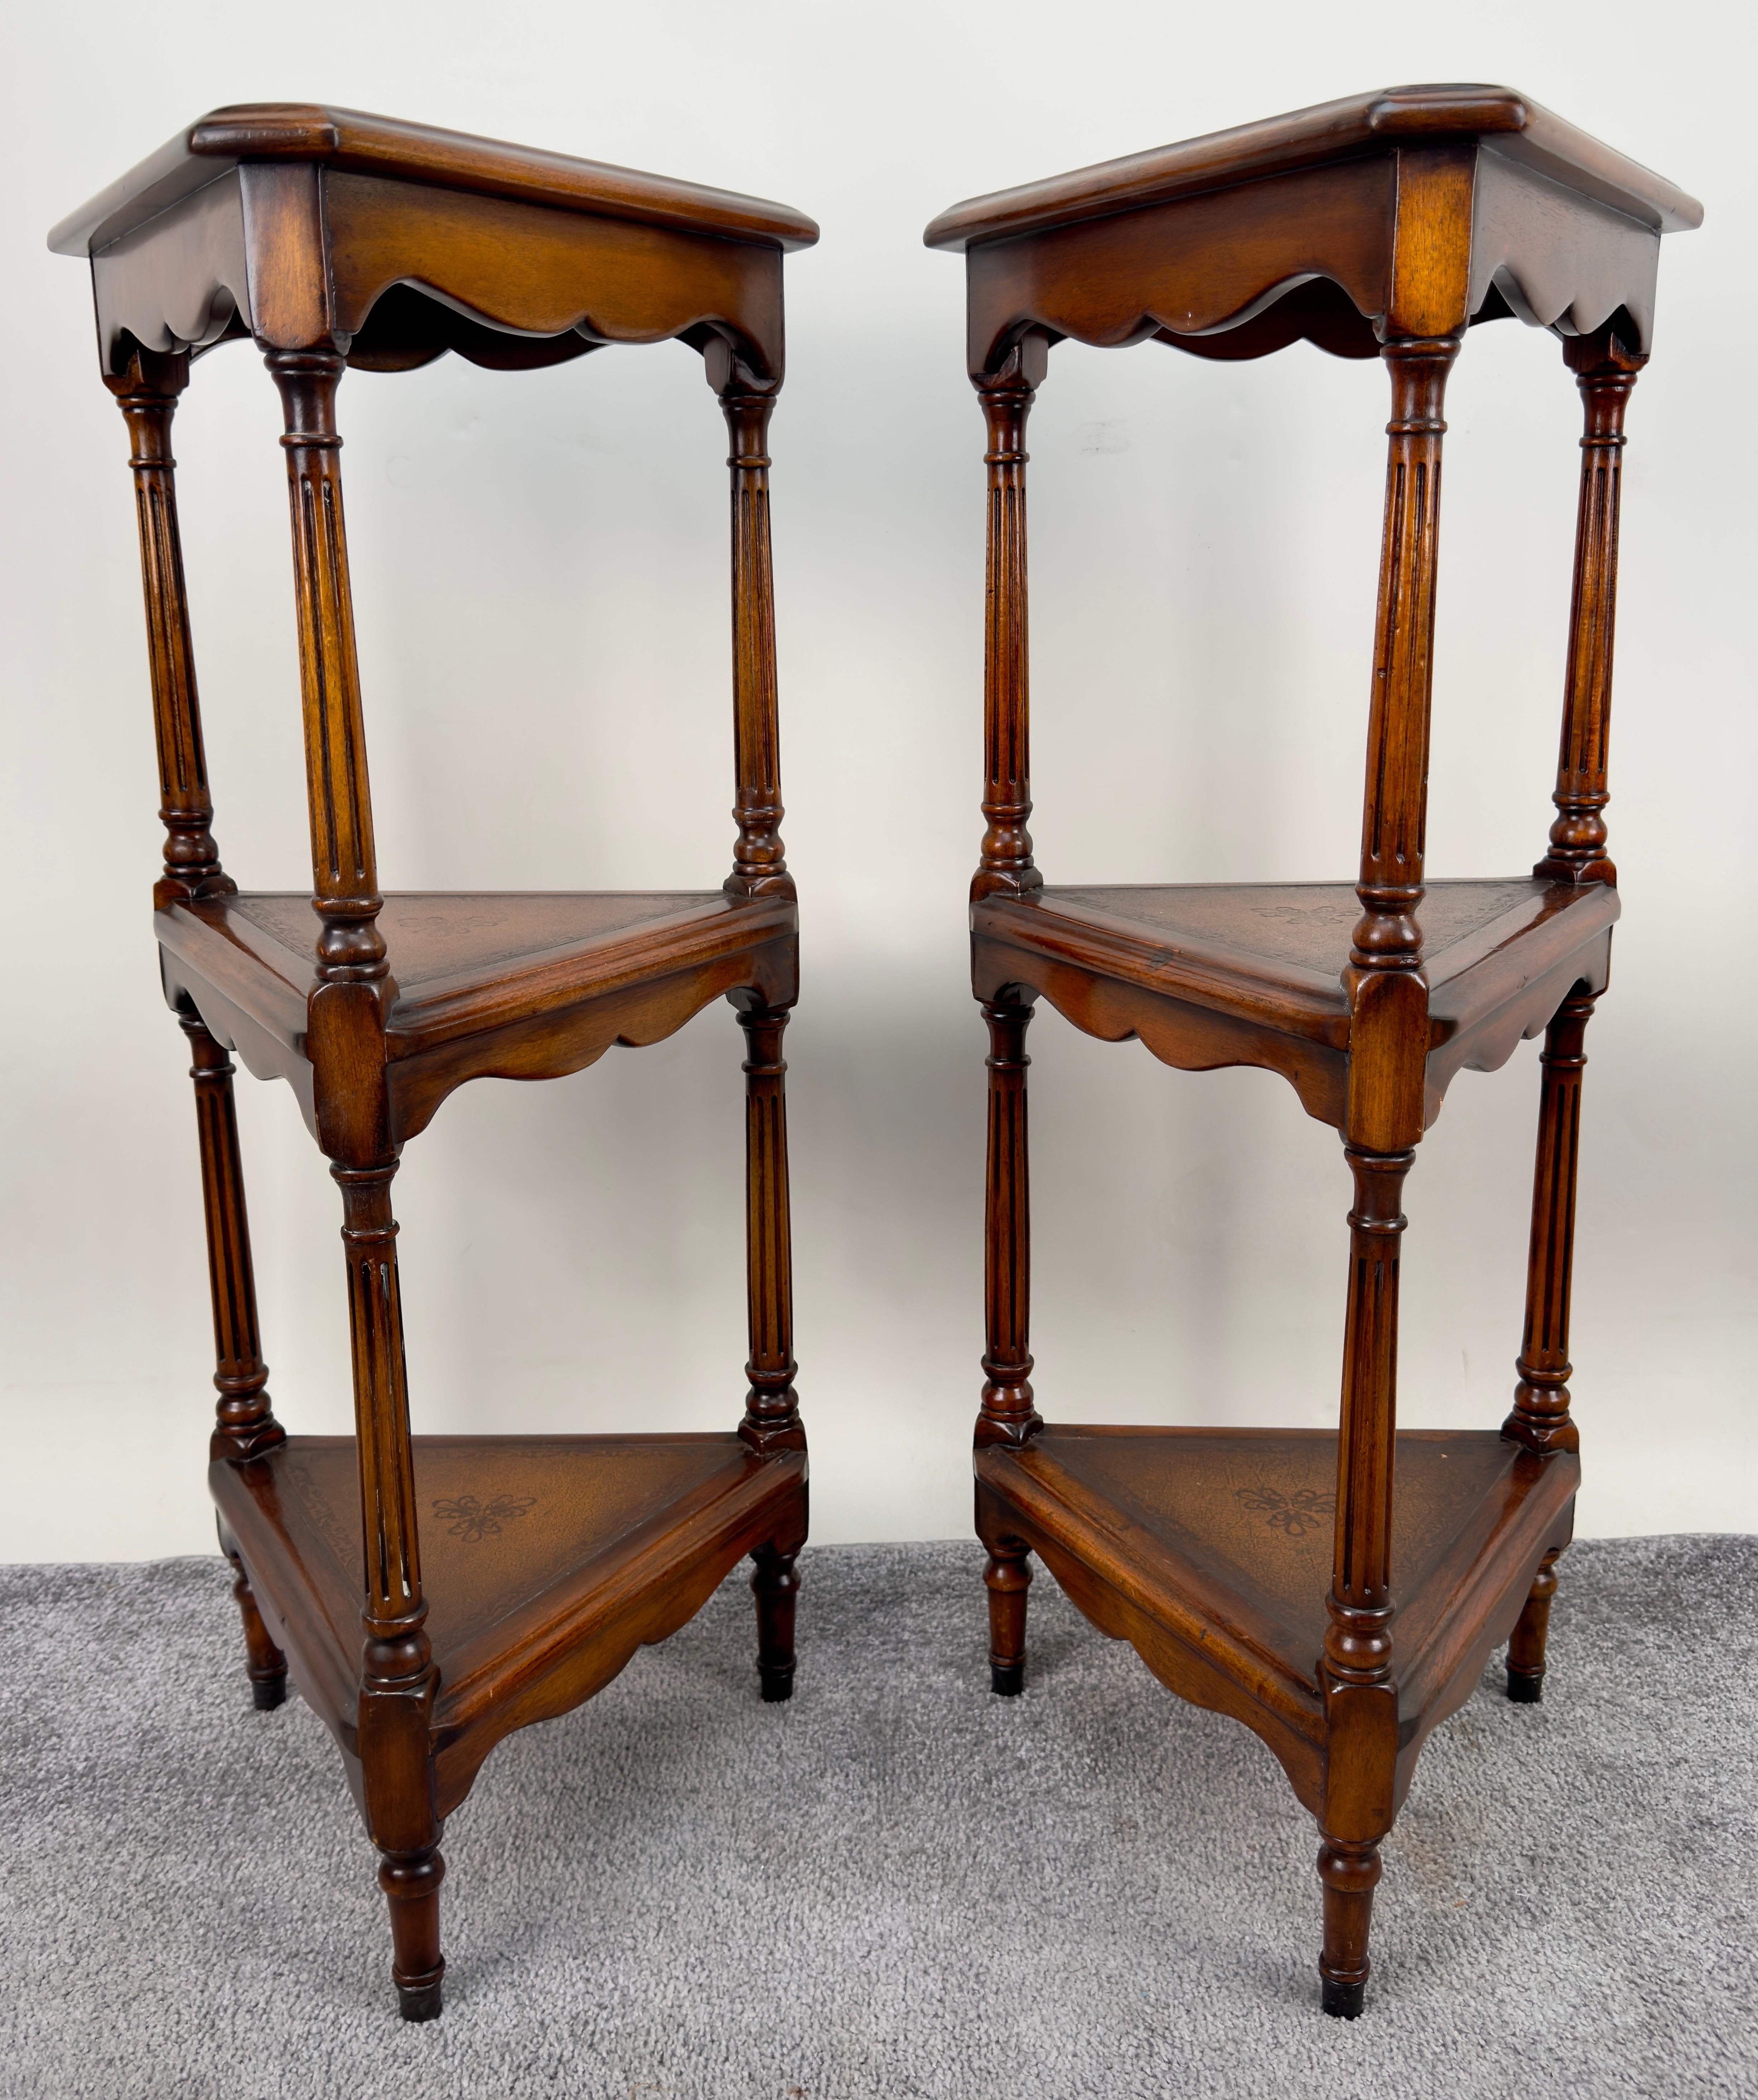 An elegant pair of Hollywood Regency Style Mahogany 3 tiered Pedestals or etageres Designed by Theodor Alexander and made in Vietnam. The beautiful pedestals feature three triangle leather tooled shelves to display plants or decor pieces and